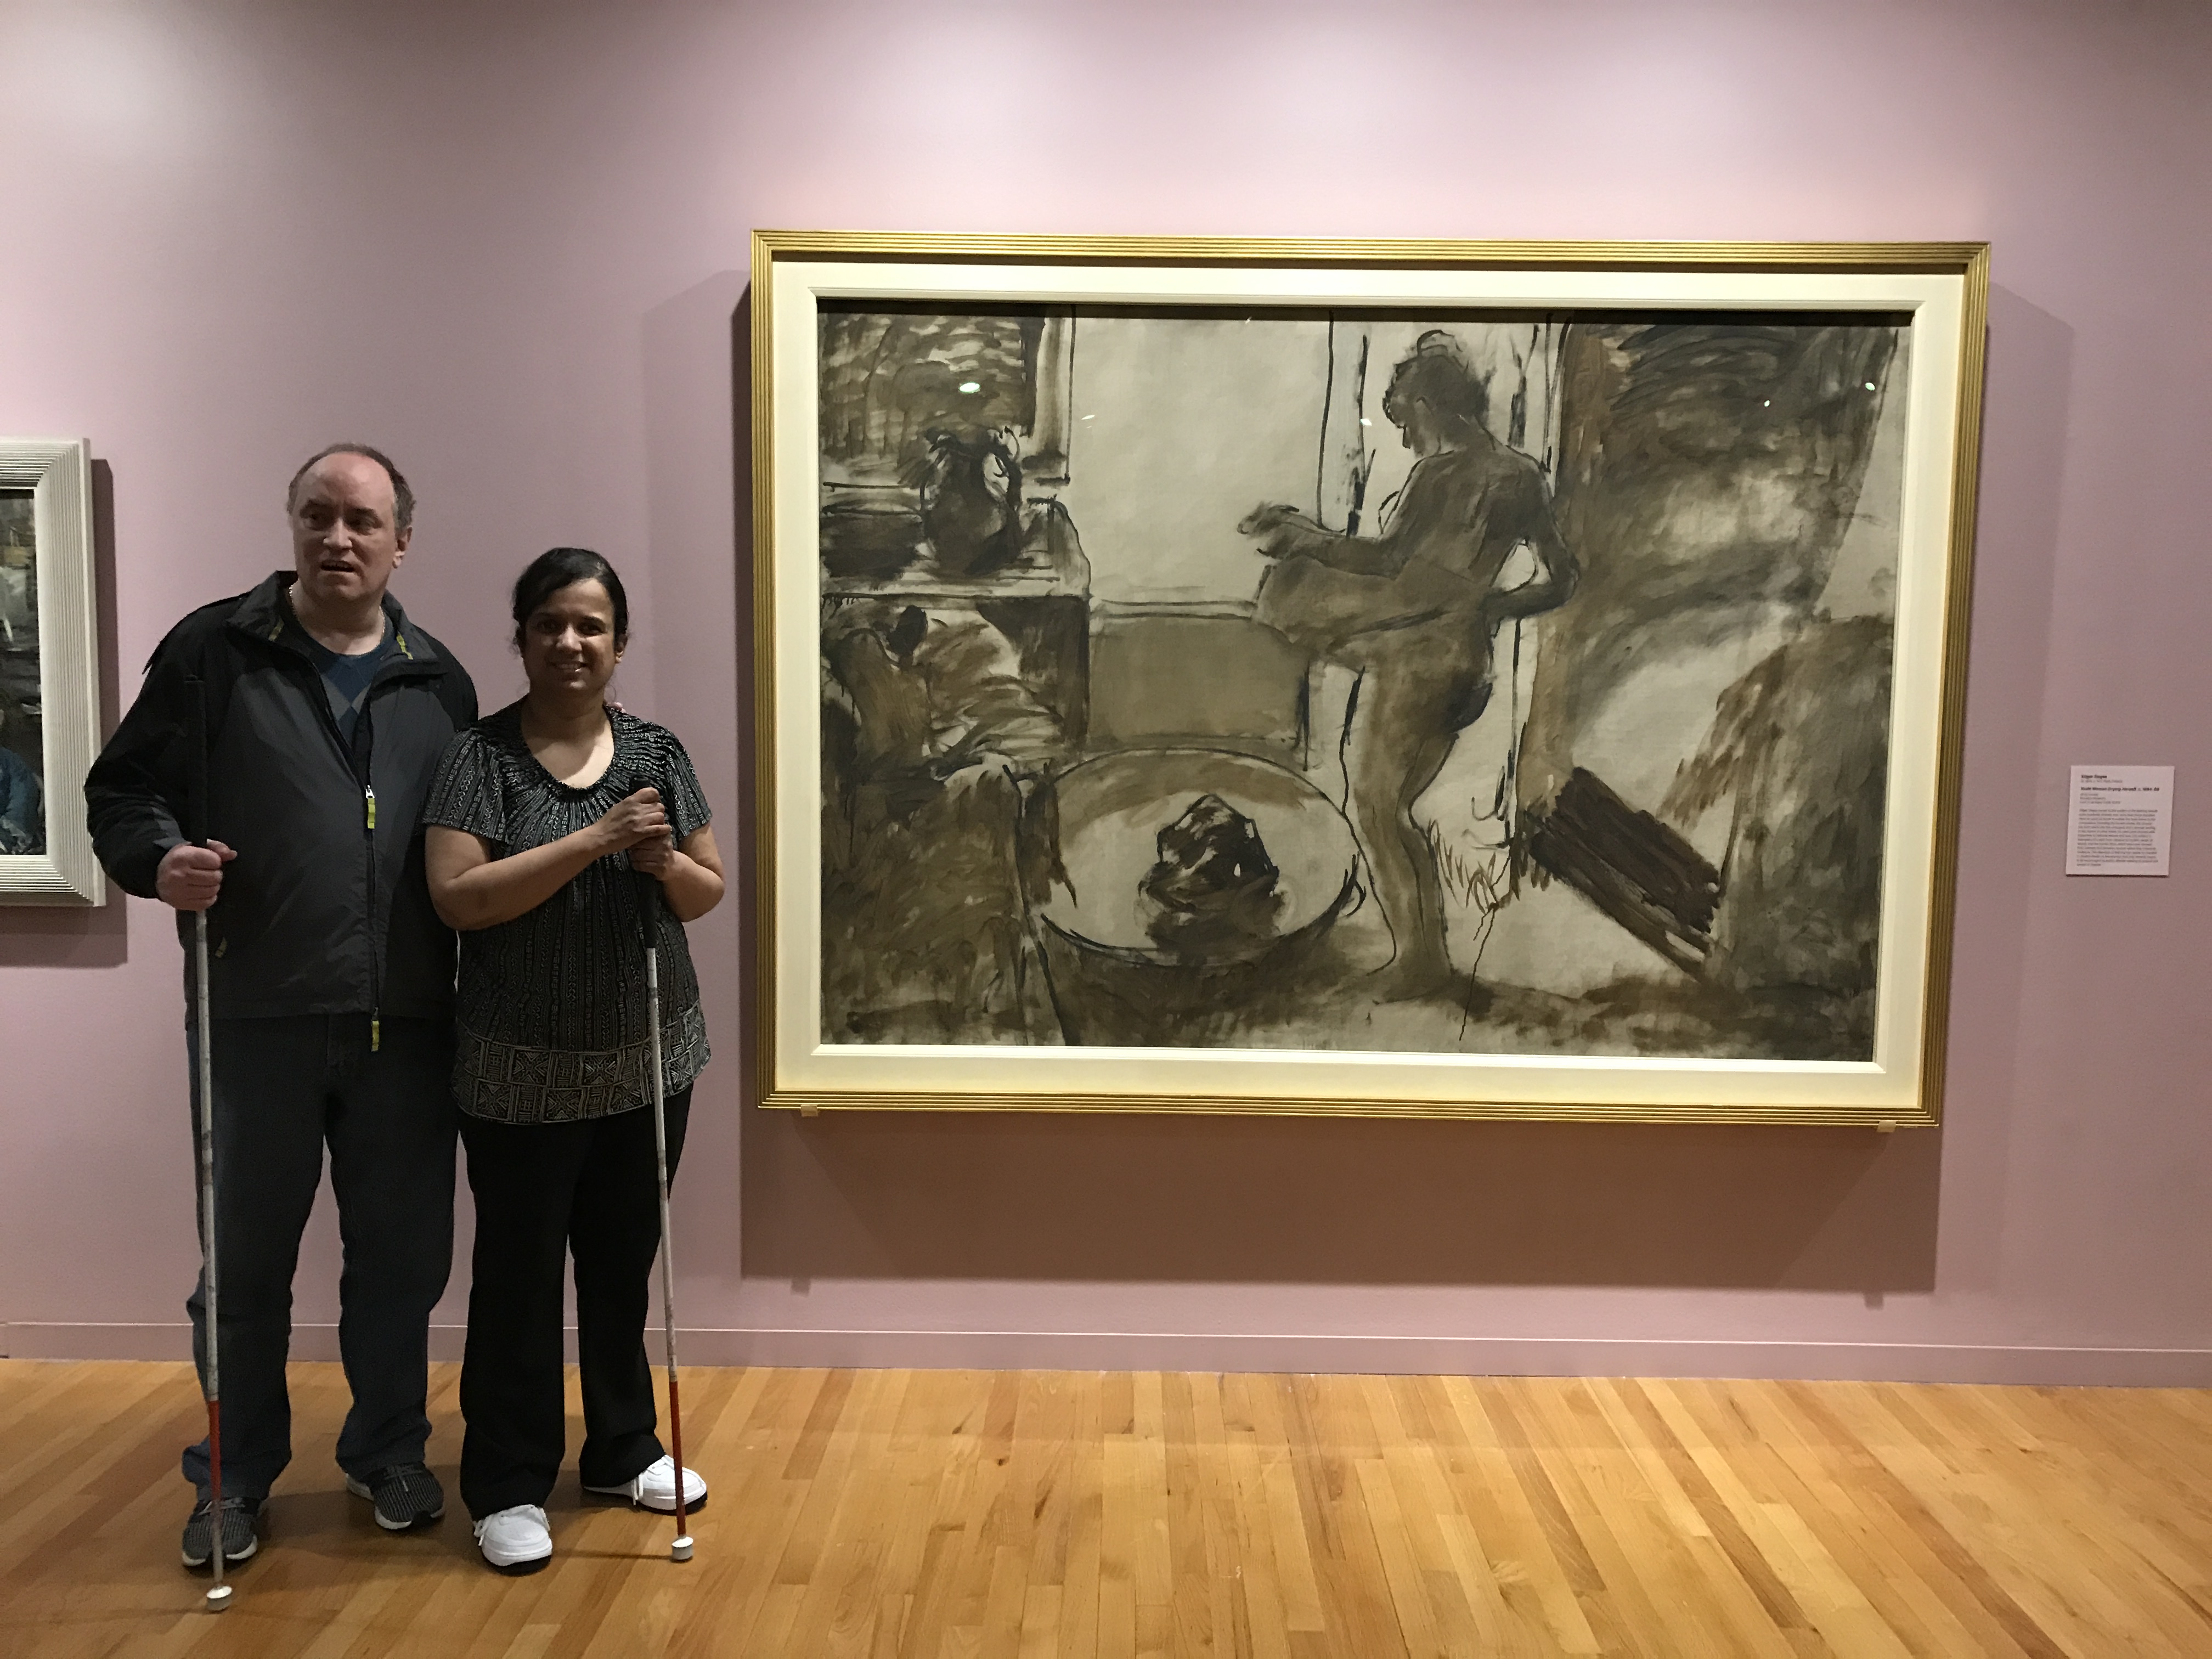 Kristy and Shawn beside one of the paintings by the French masters